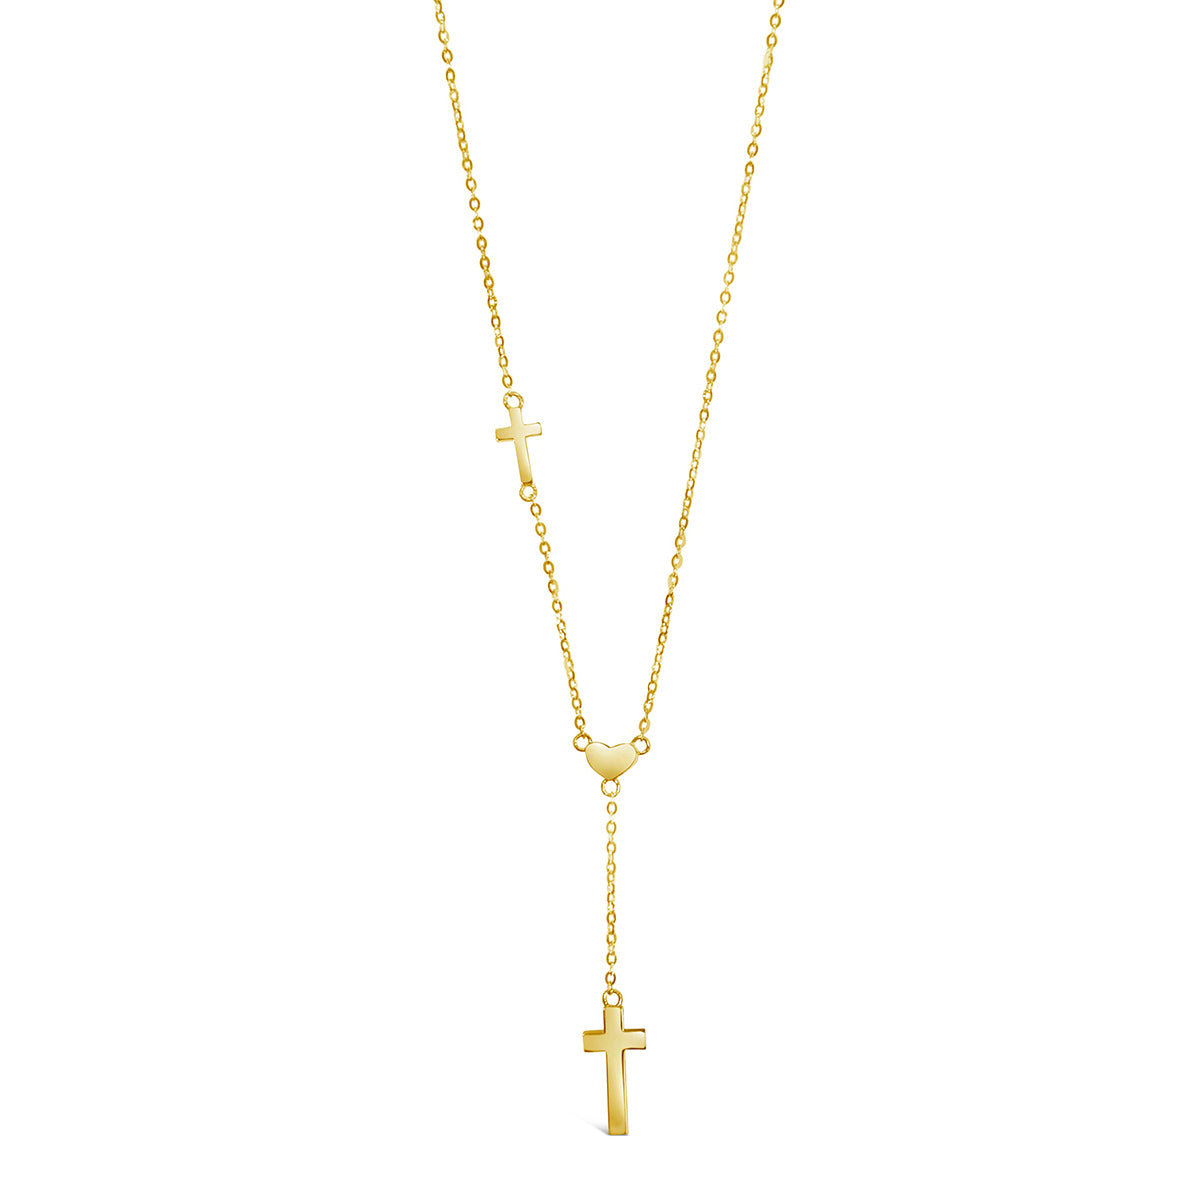 14k Yellow Gold Heart & Double Cross Pendant Necklace